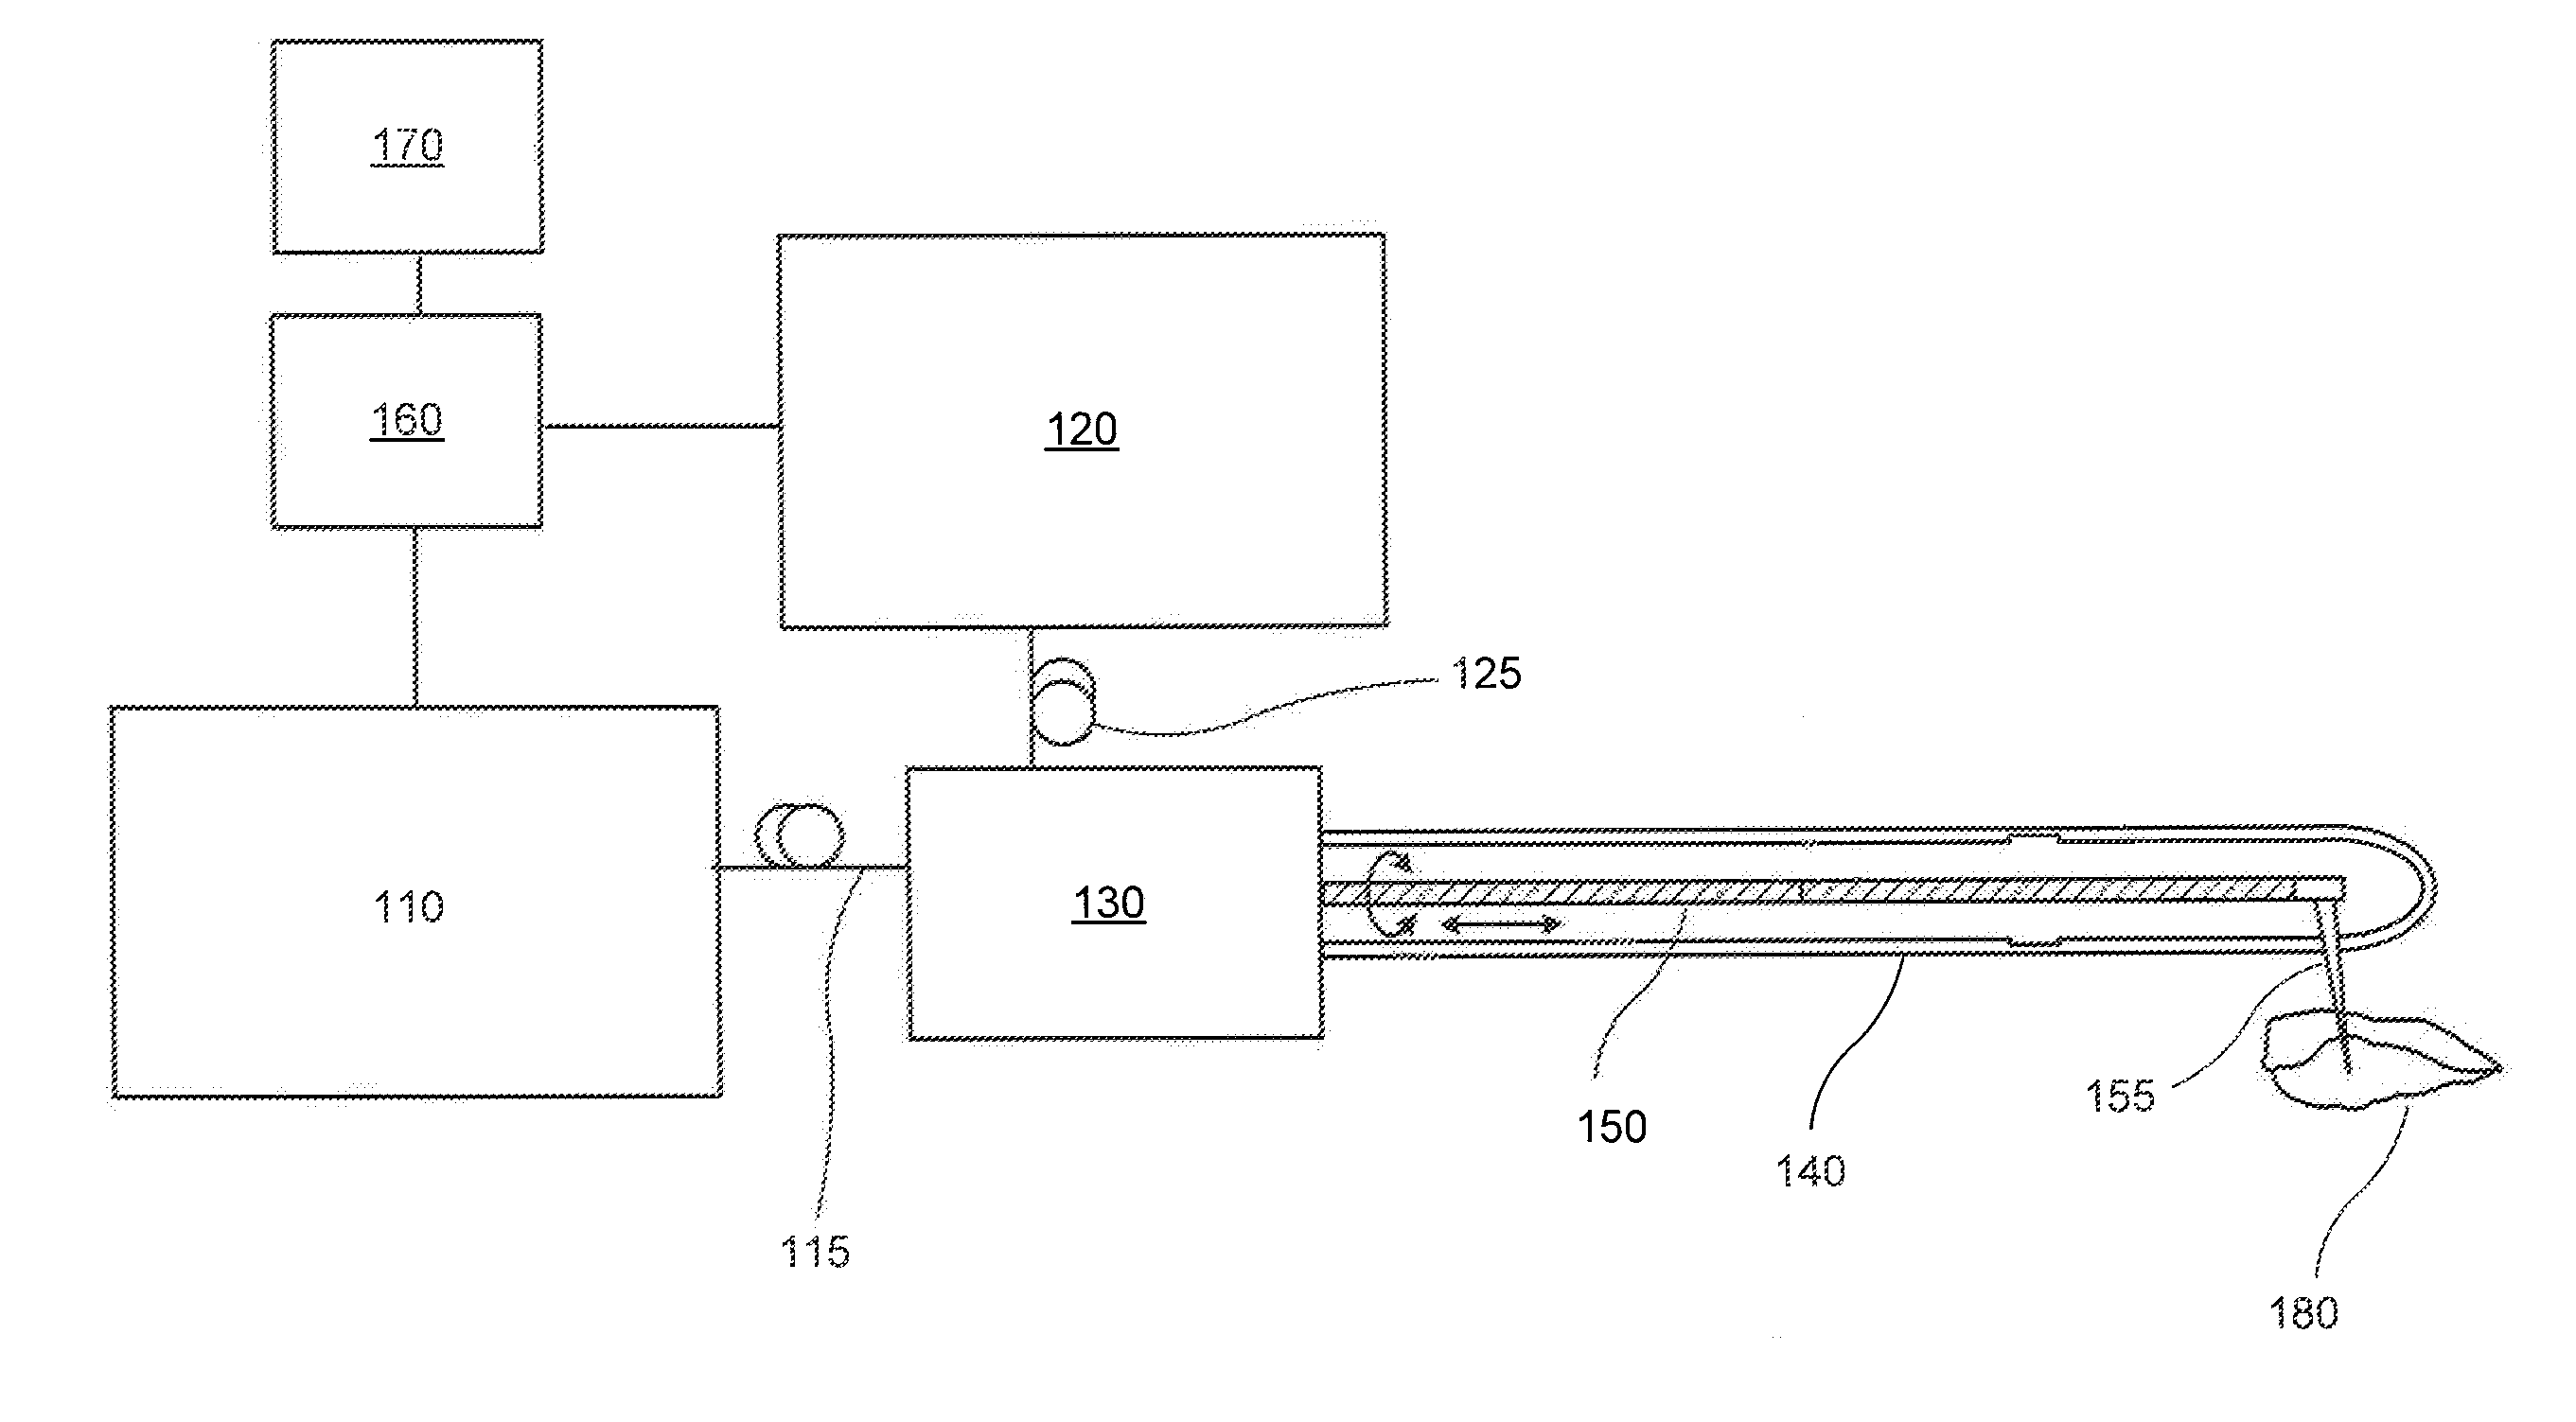 Systems, devices, methods, apparatus and computer-accessible media for providing optical imaging of structures and compositions